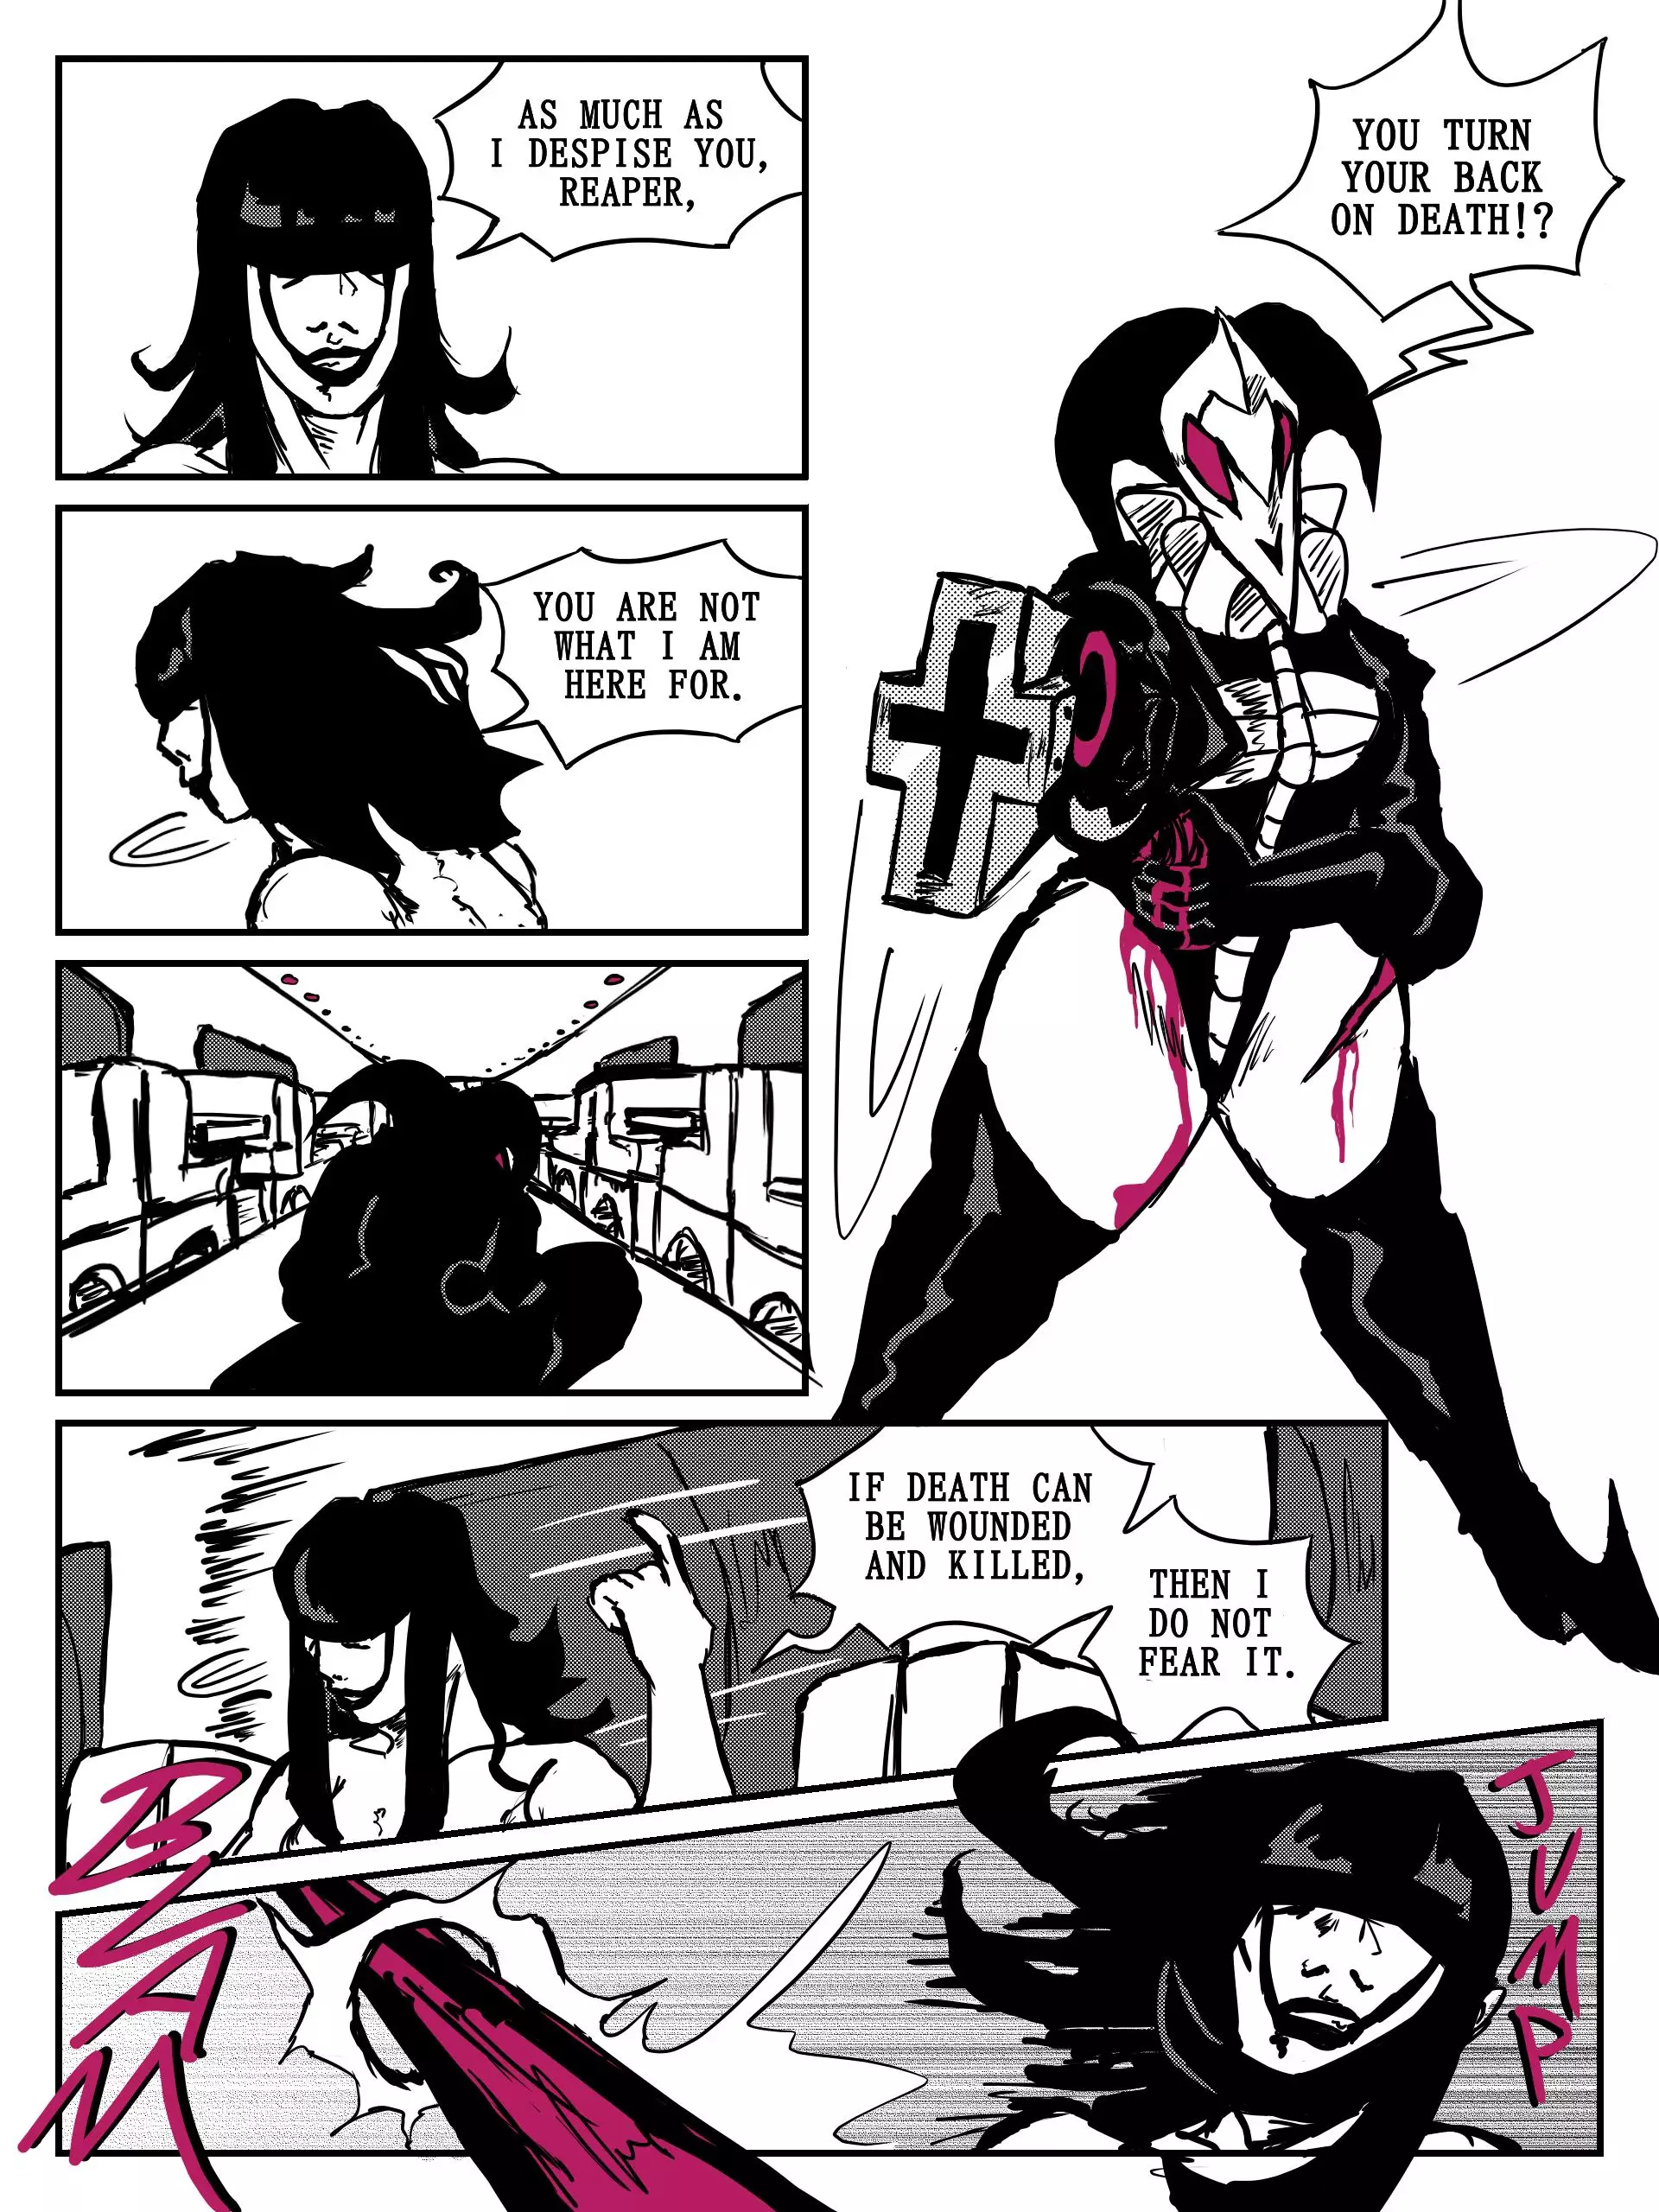 Don't Fear The Reaper - 8 page 9-68f1dc98